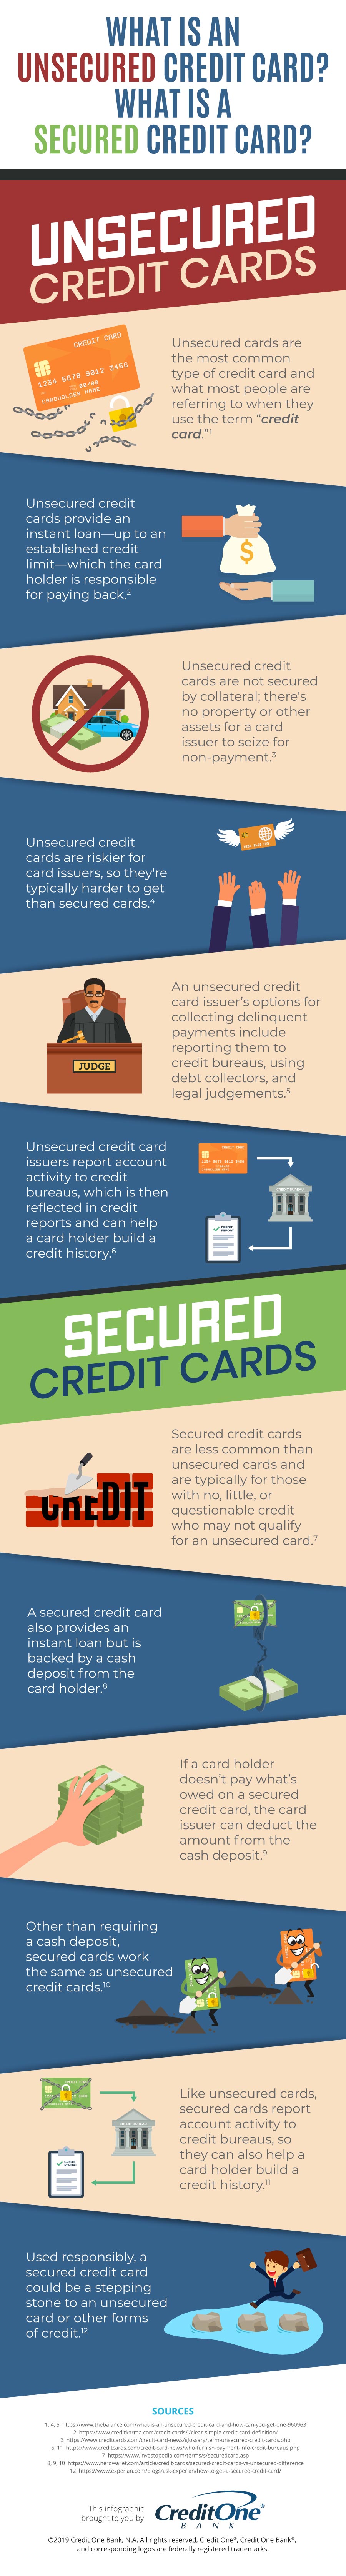 Infographic of unsecured vs secured credit cards